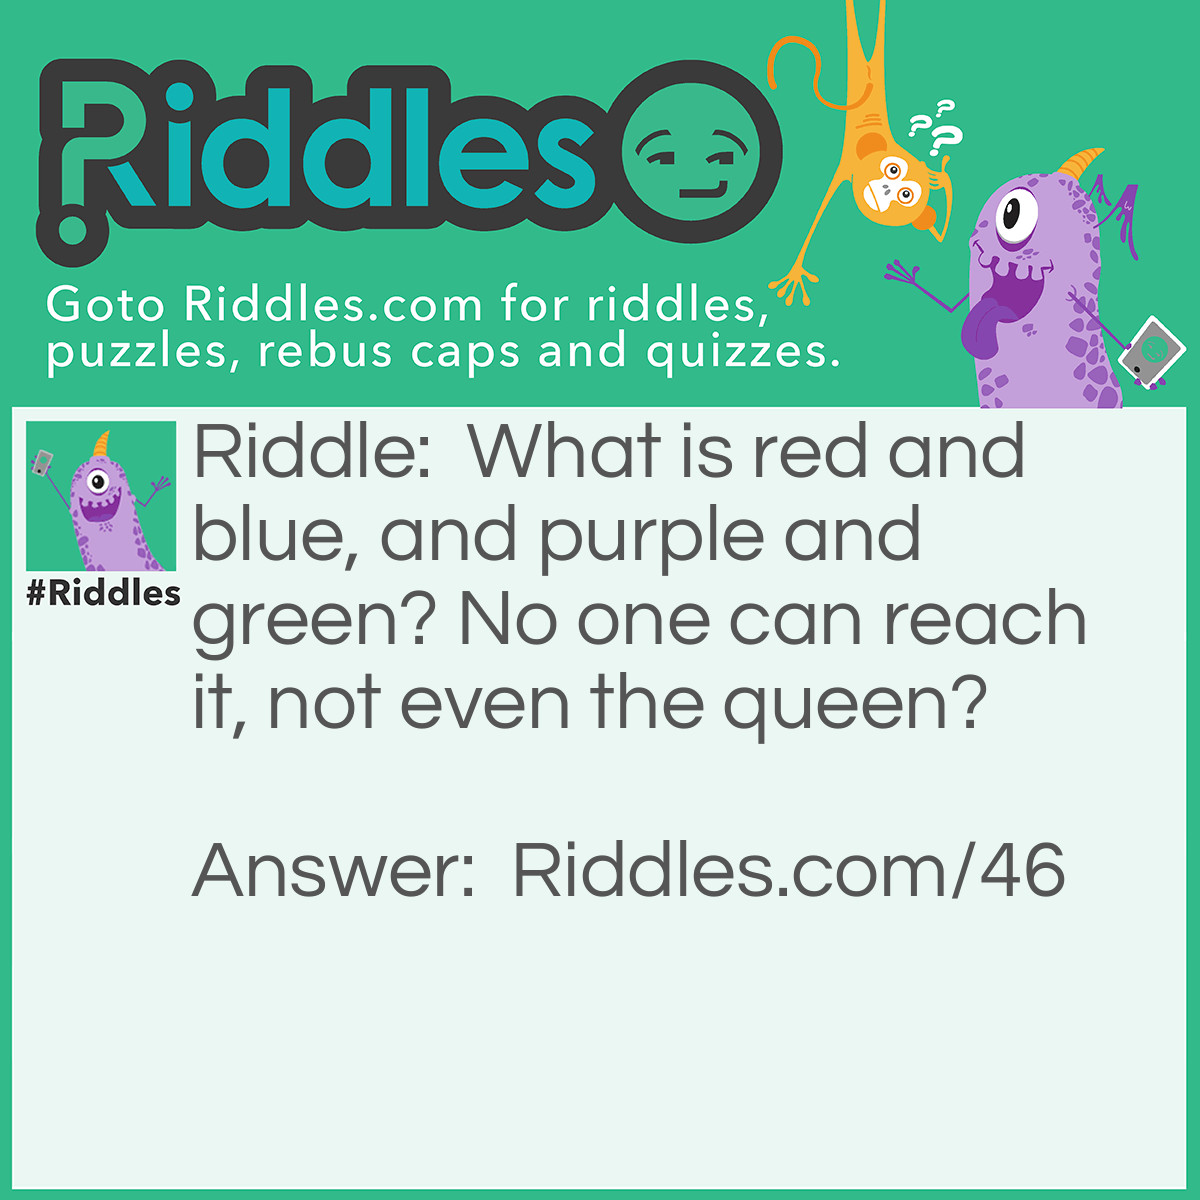 Riddle: What is red and blue, and purple and green? No one can reach it, not even the queen? Answer: A Rainbow.